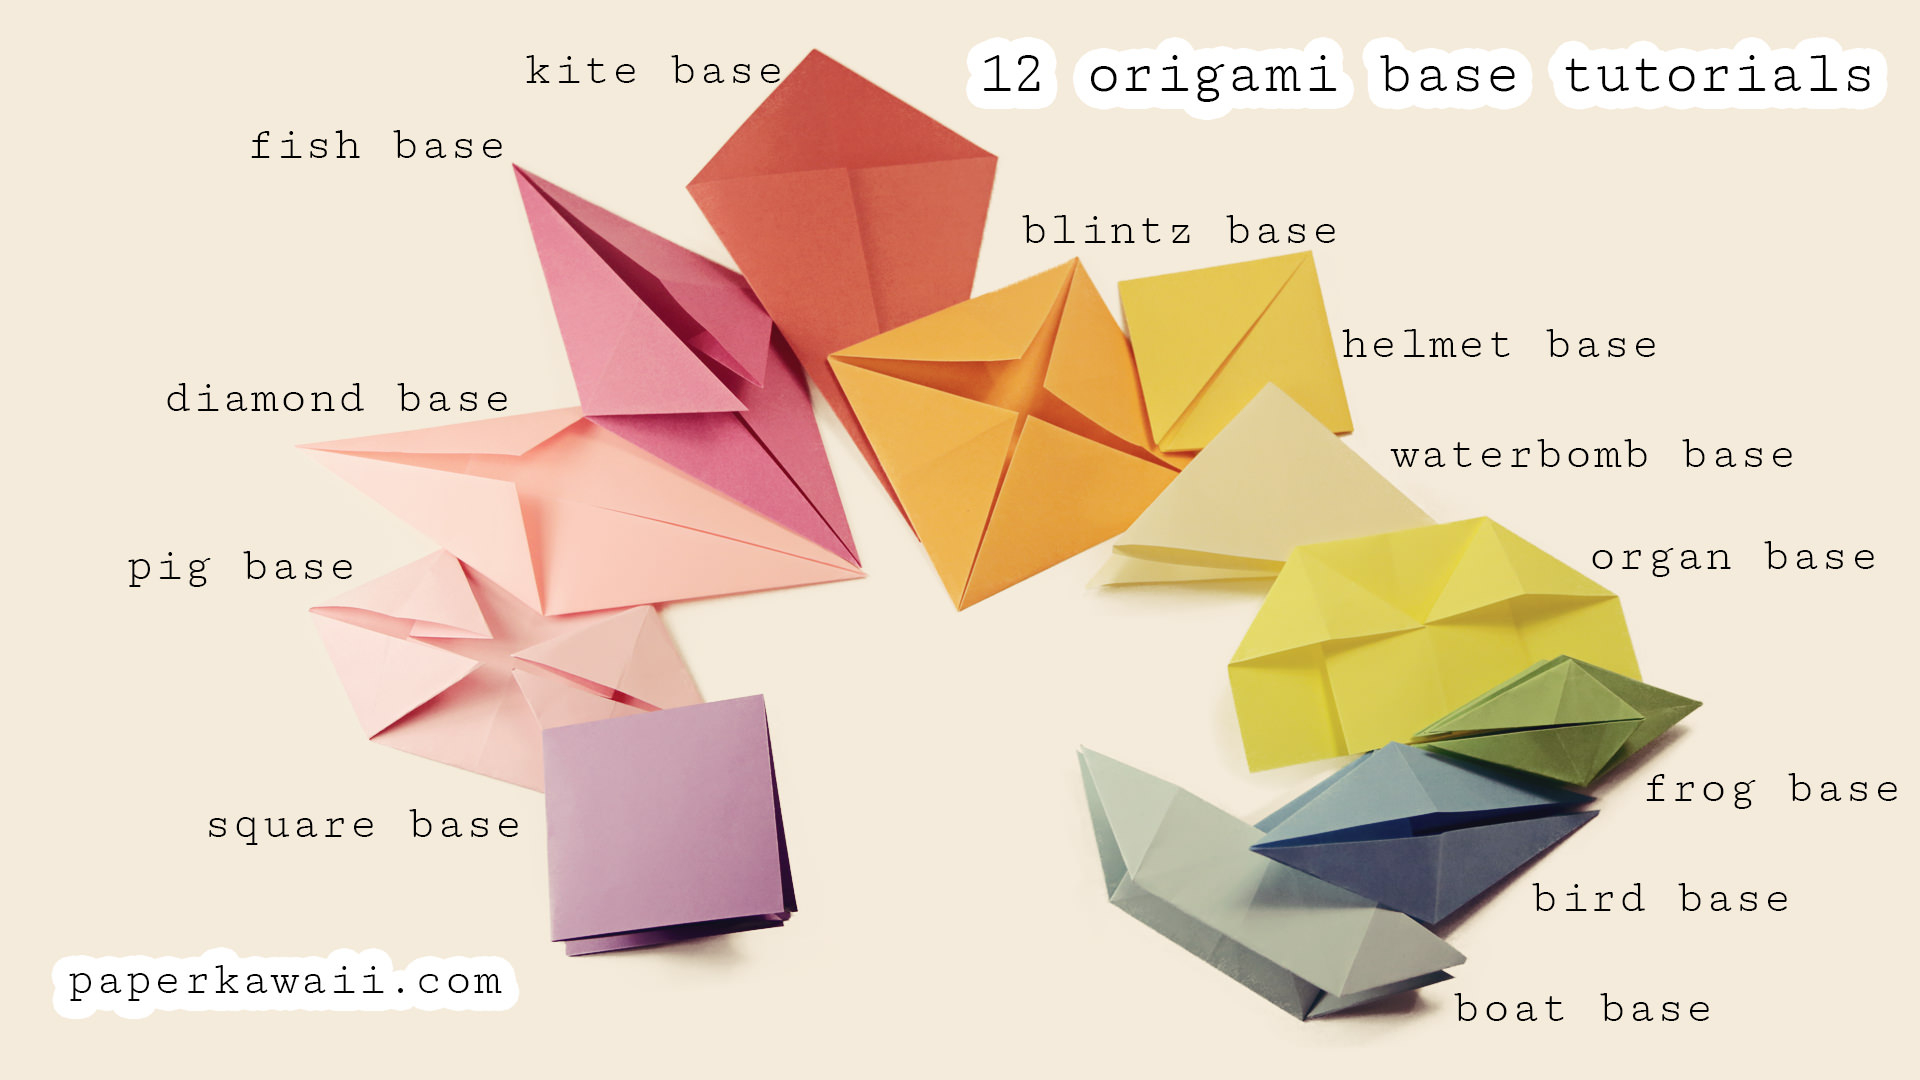 Fish Base Origami Origami Base Folds For Beginners Paper Kawaii